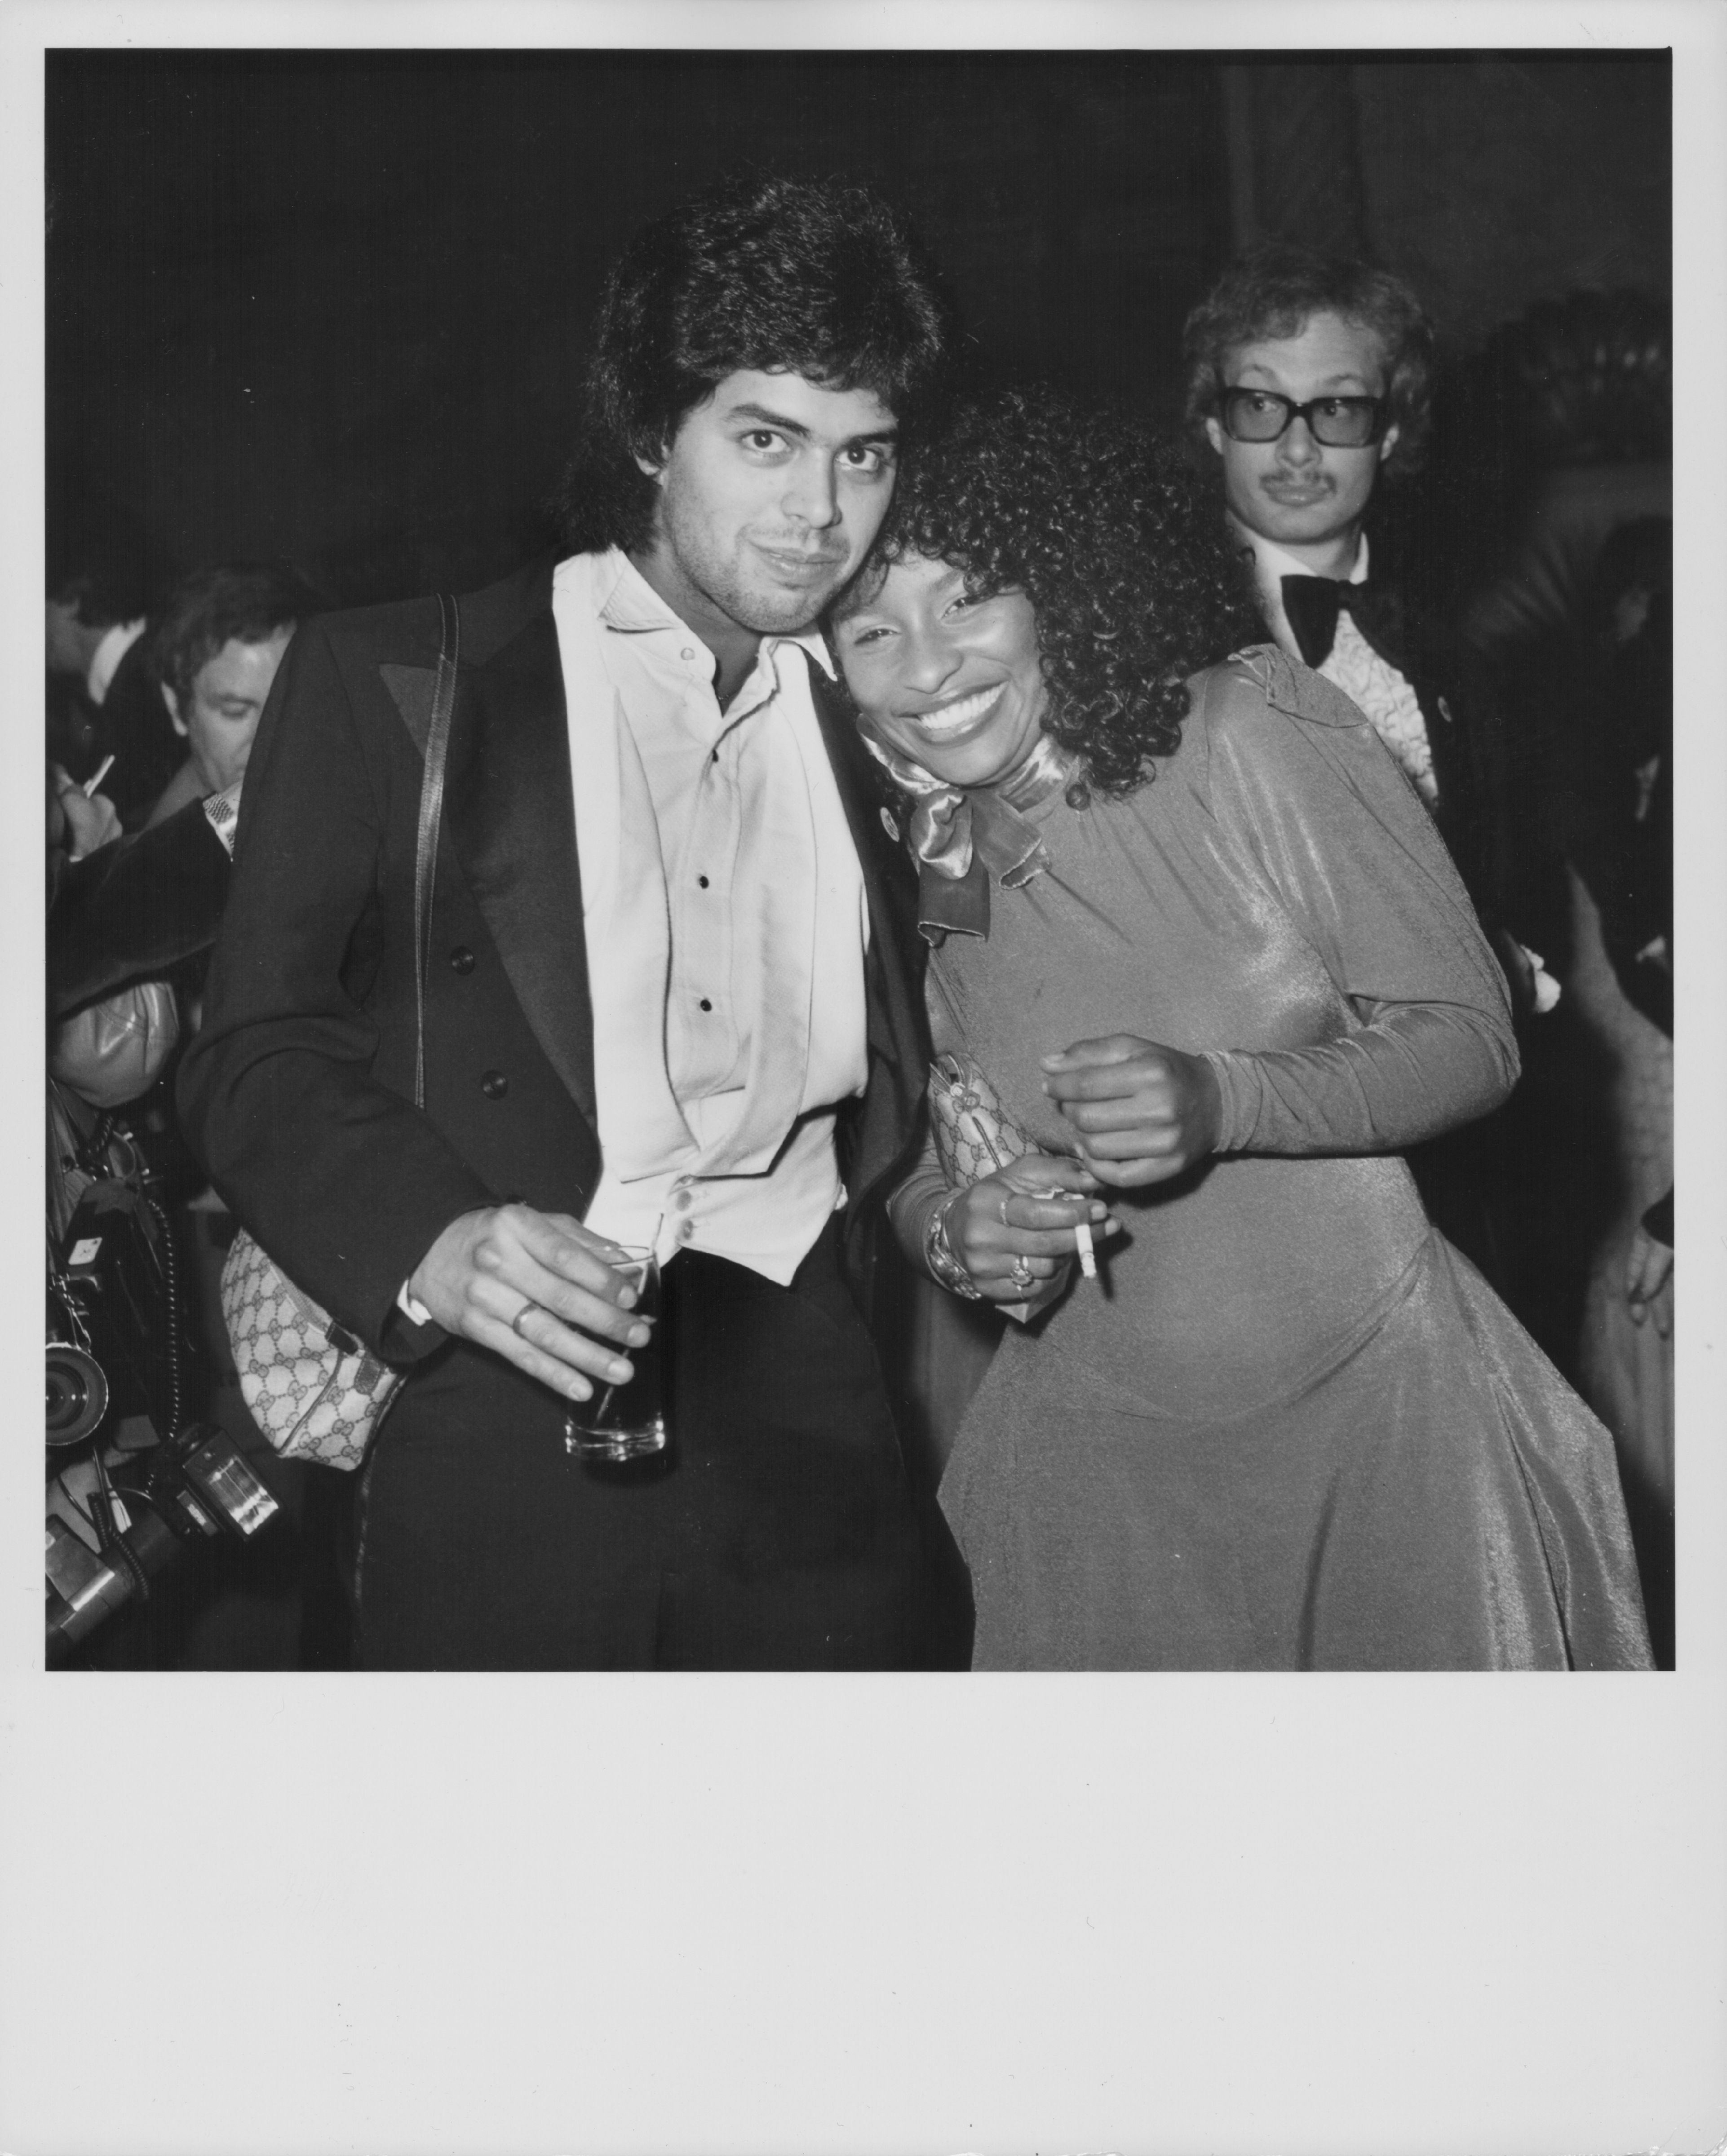 Chaka Khan and Richard Holland pose at the Grammy Awards party at the Biltmore Hotel on February 23, 1978, in California | Source: Getty Images